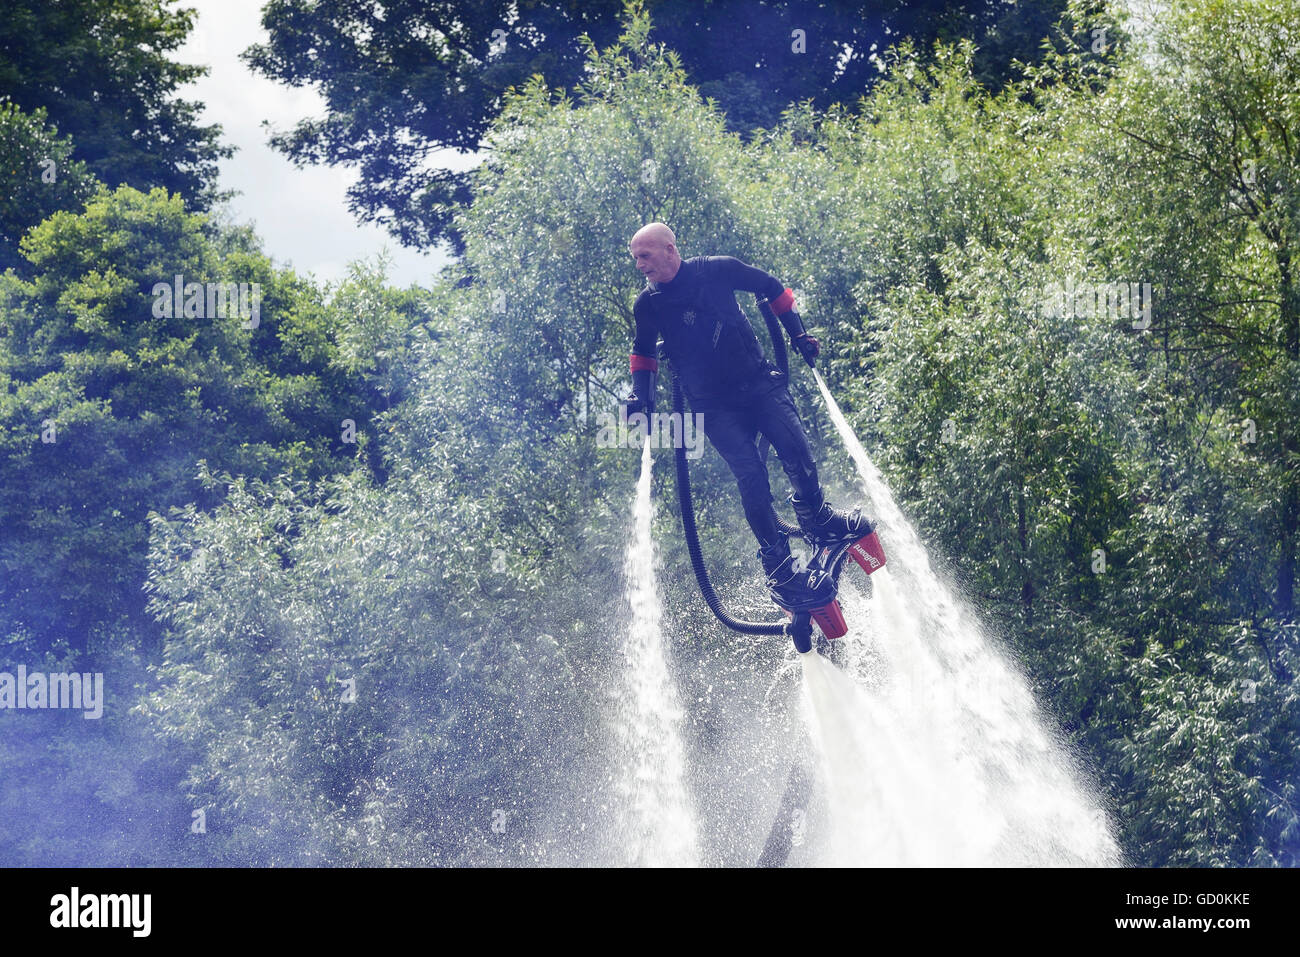 Chester, UK. 10th July 2016. UK Fly-board Champion Jay St John at the annual Charity Raft Race on the River Dee organised by Chester Rotary Club. Chester, UK. Andrew Paterson/Alamy Live News Stock Photo